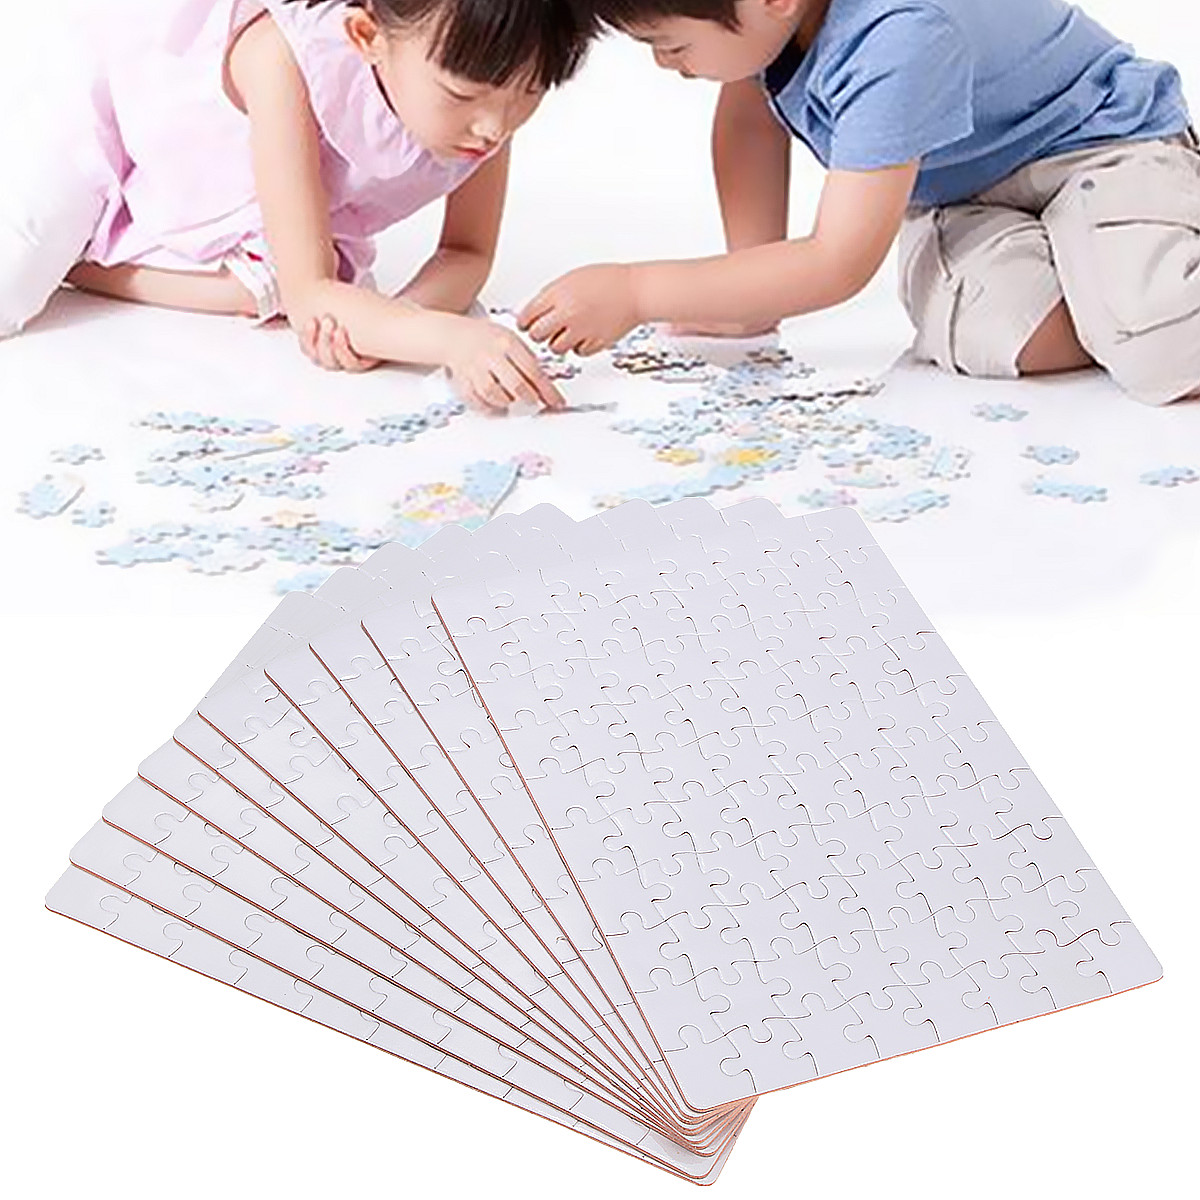 DyeTrans Sublimation Blank Cardboard Puzzle 